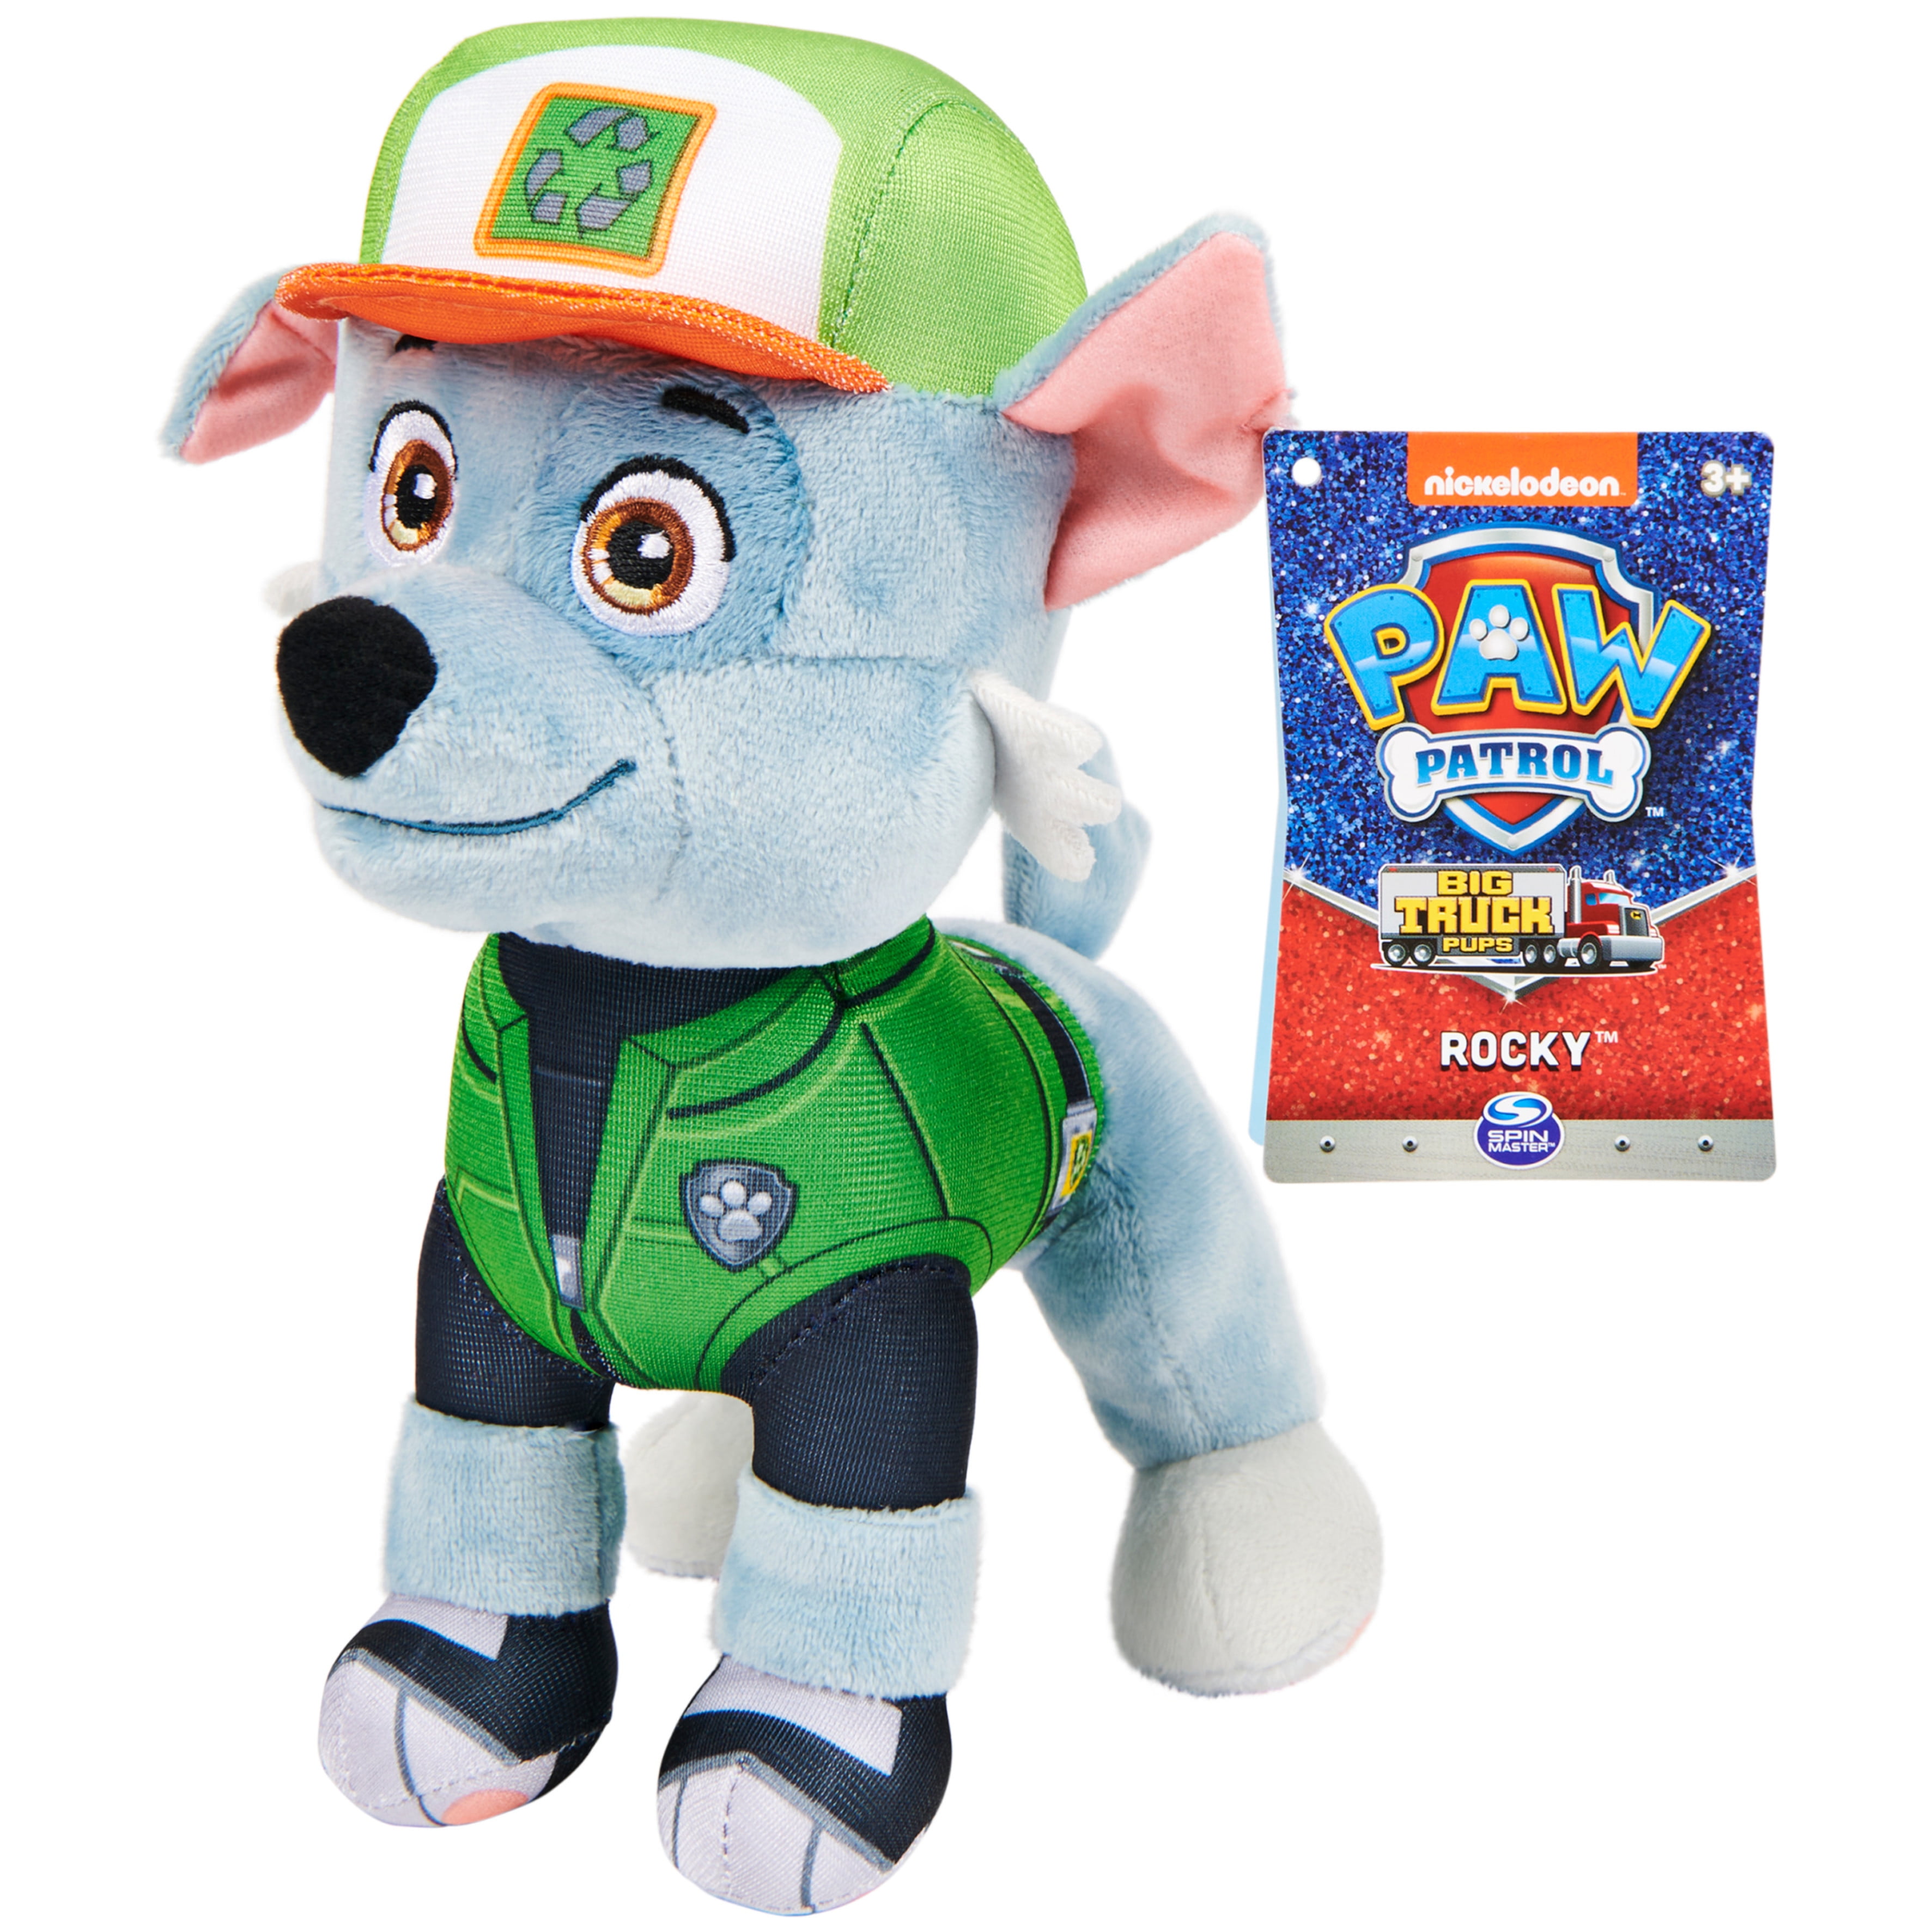 PAW Patrol, Big Truck Pup Rocky, Stuffed Animal 8-inch, Plush Kids Toys for  Ages 3 and up 